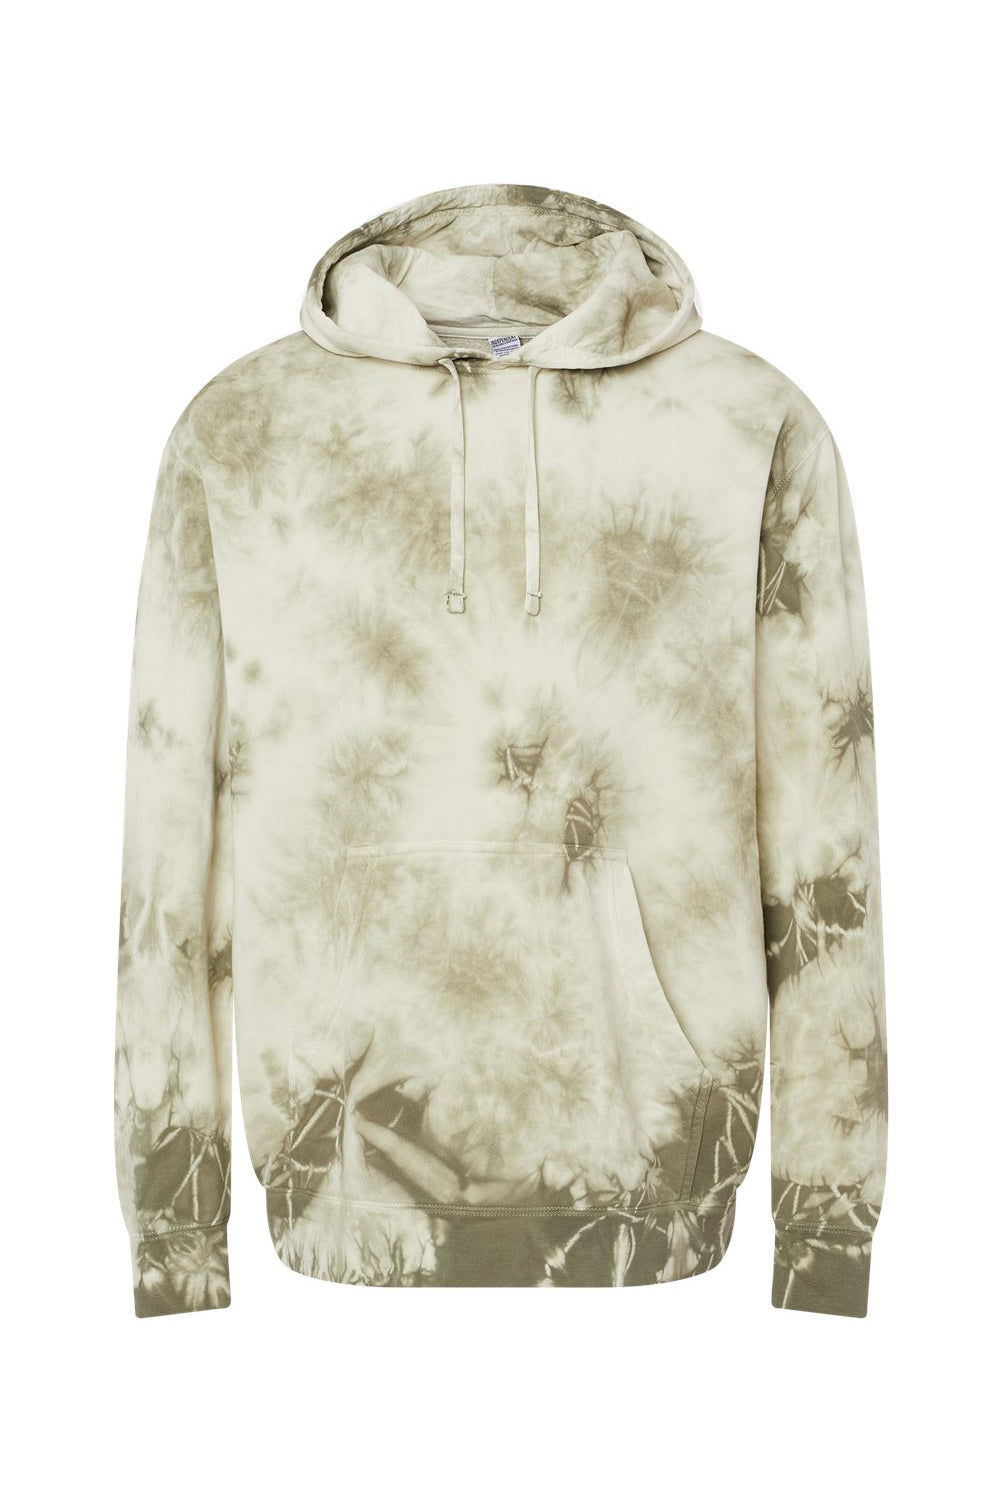 Independent Trading Co. PRM4500TD Mens Tie-Dye Hooded Sweatshirt Hoodie Olive Green Flat Front